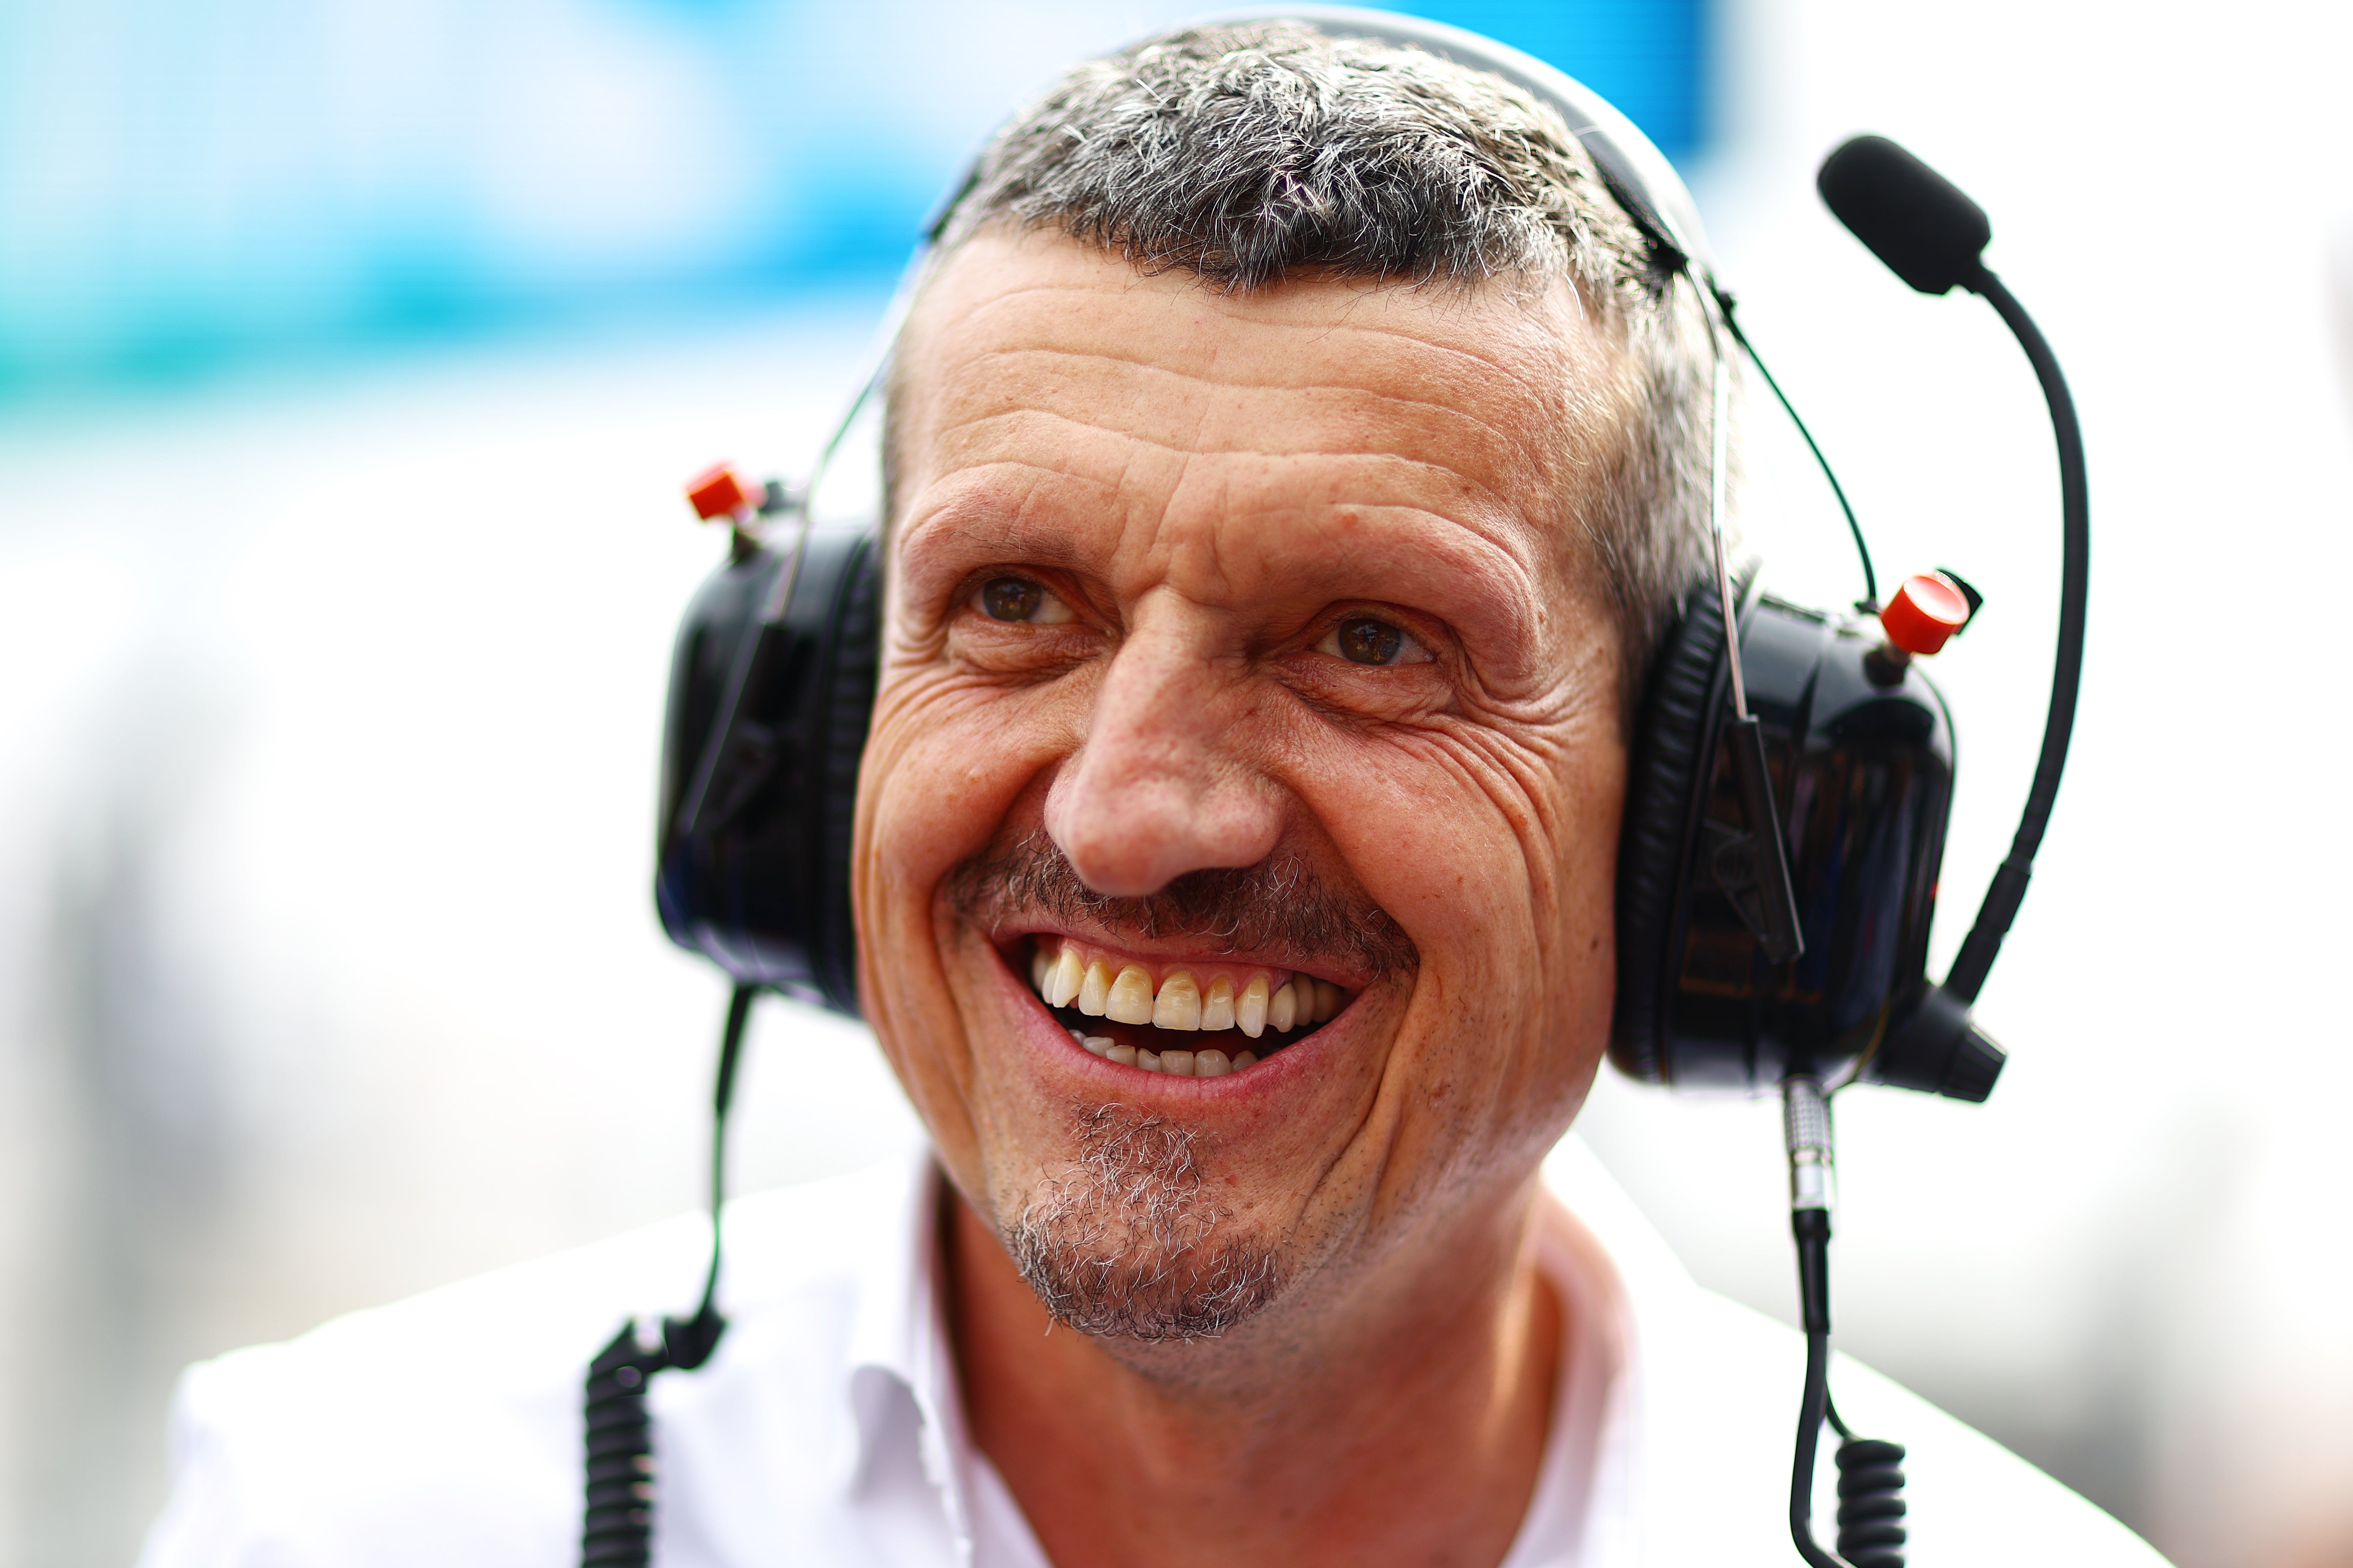 Guenther Steiner spoke exclusively to The Independent ahead of the 2023 F1 season